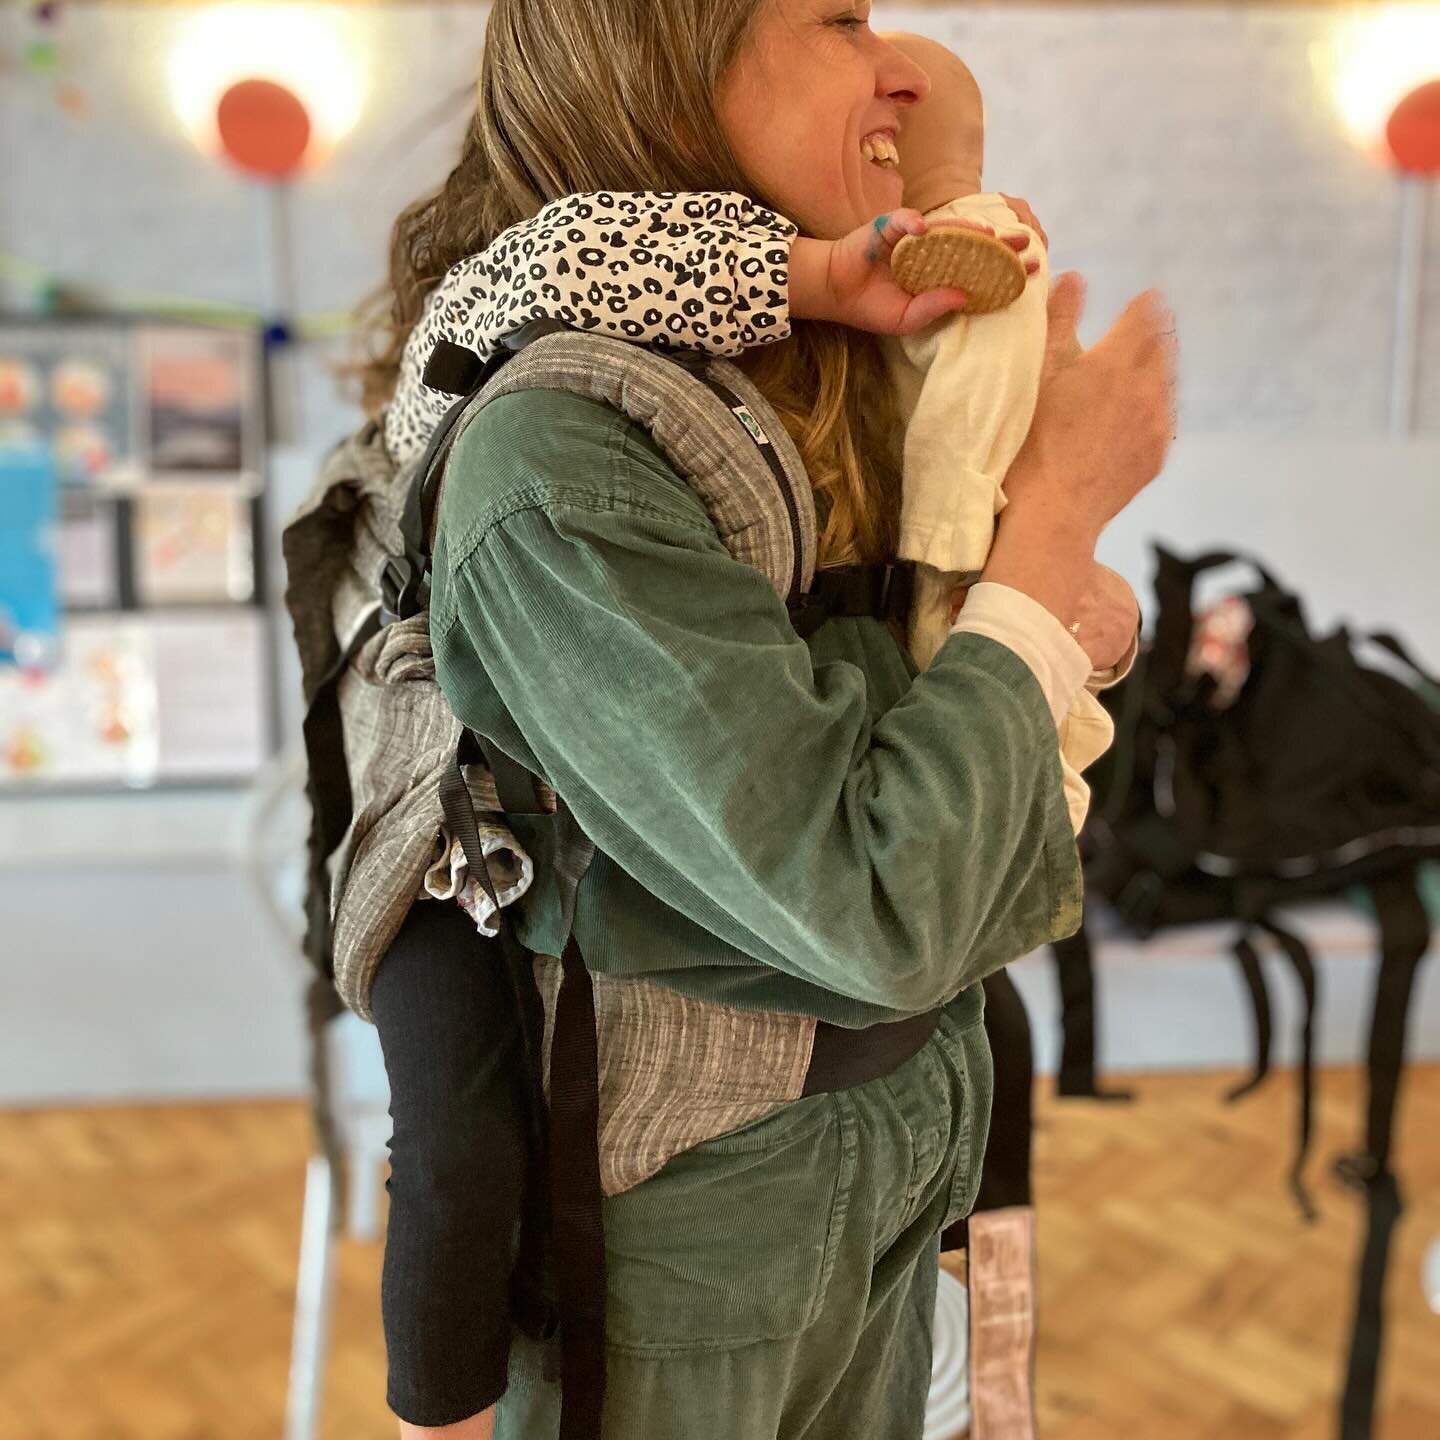 We loved hosting our Sling &amp; Carrying Workshops this month with Soshanna @wearmybabycanterbury 

My 4 year old tried out a sling for an older child and loved the cuddles. 

We observed parents gaining confidence with the slings and smiles spreadi